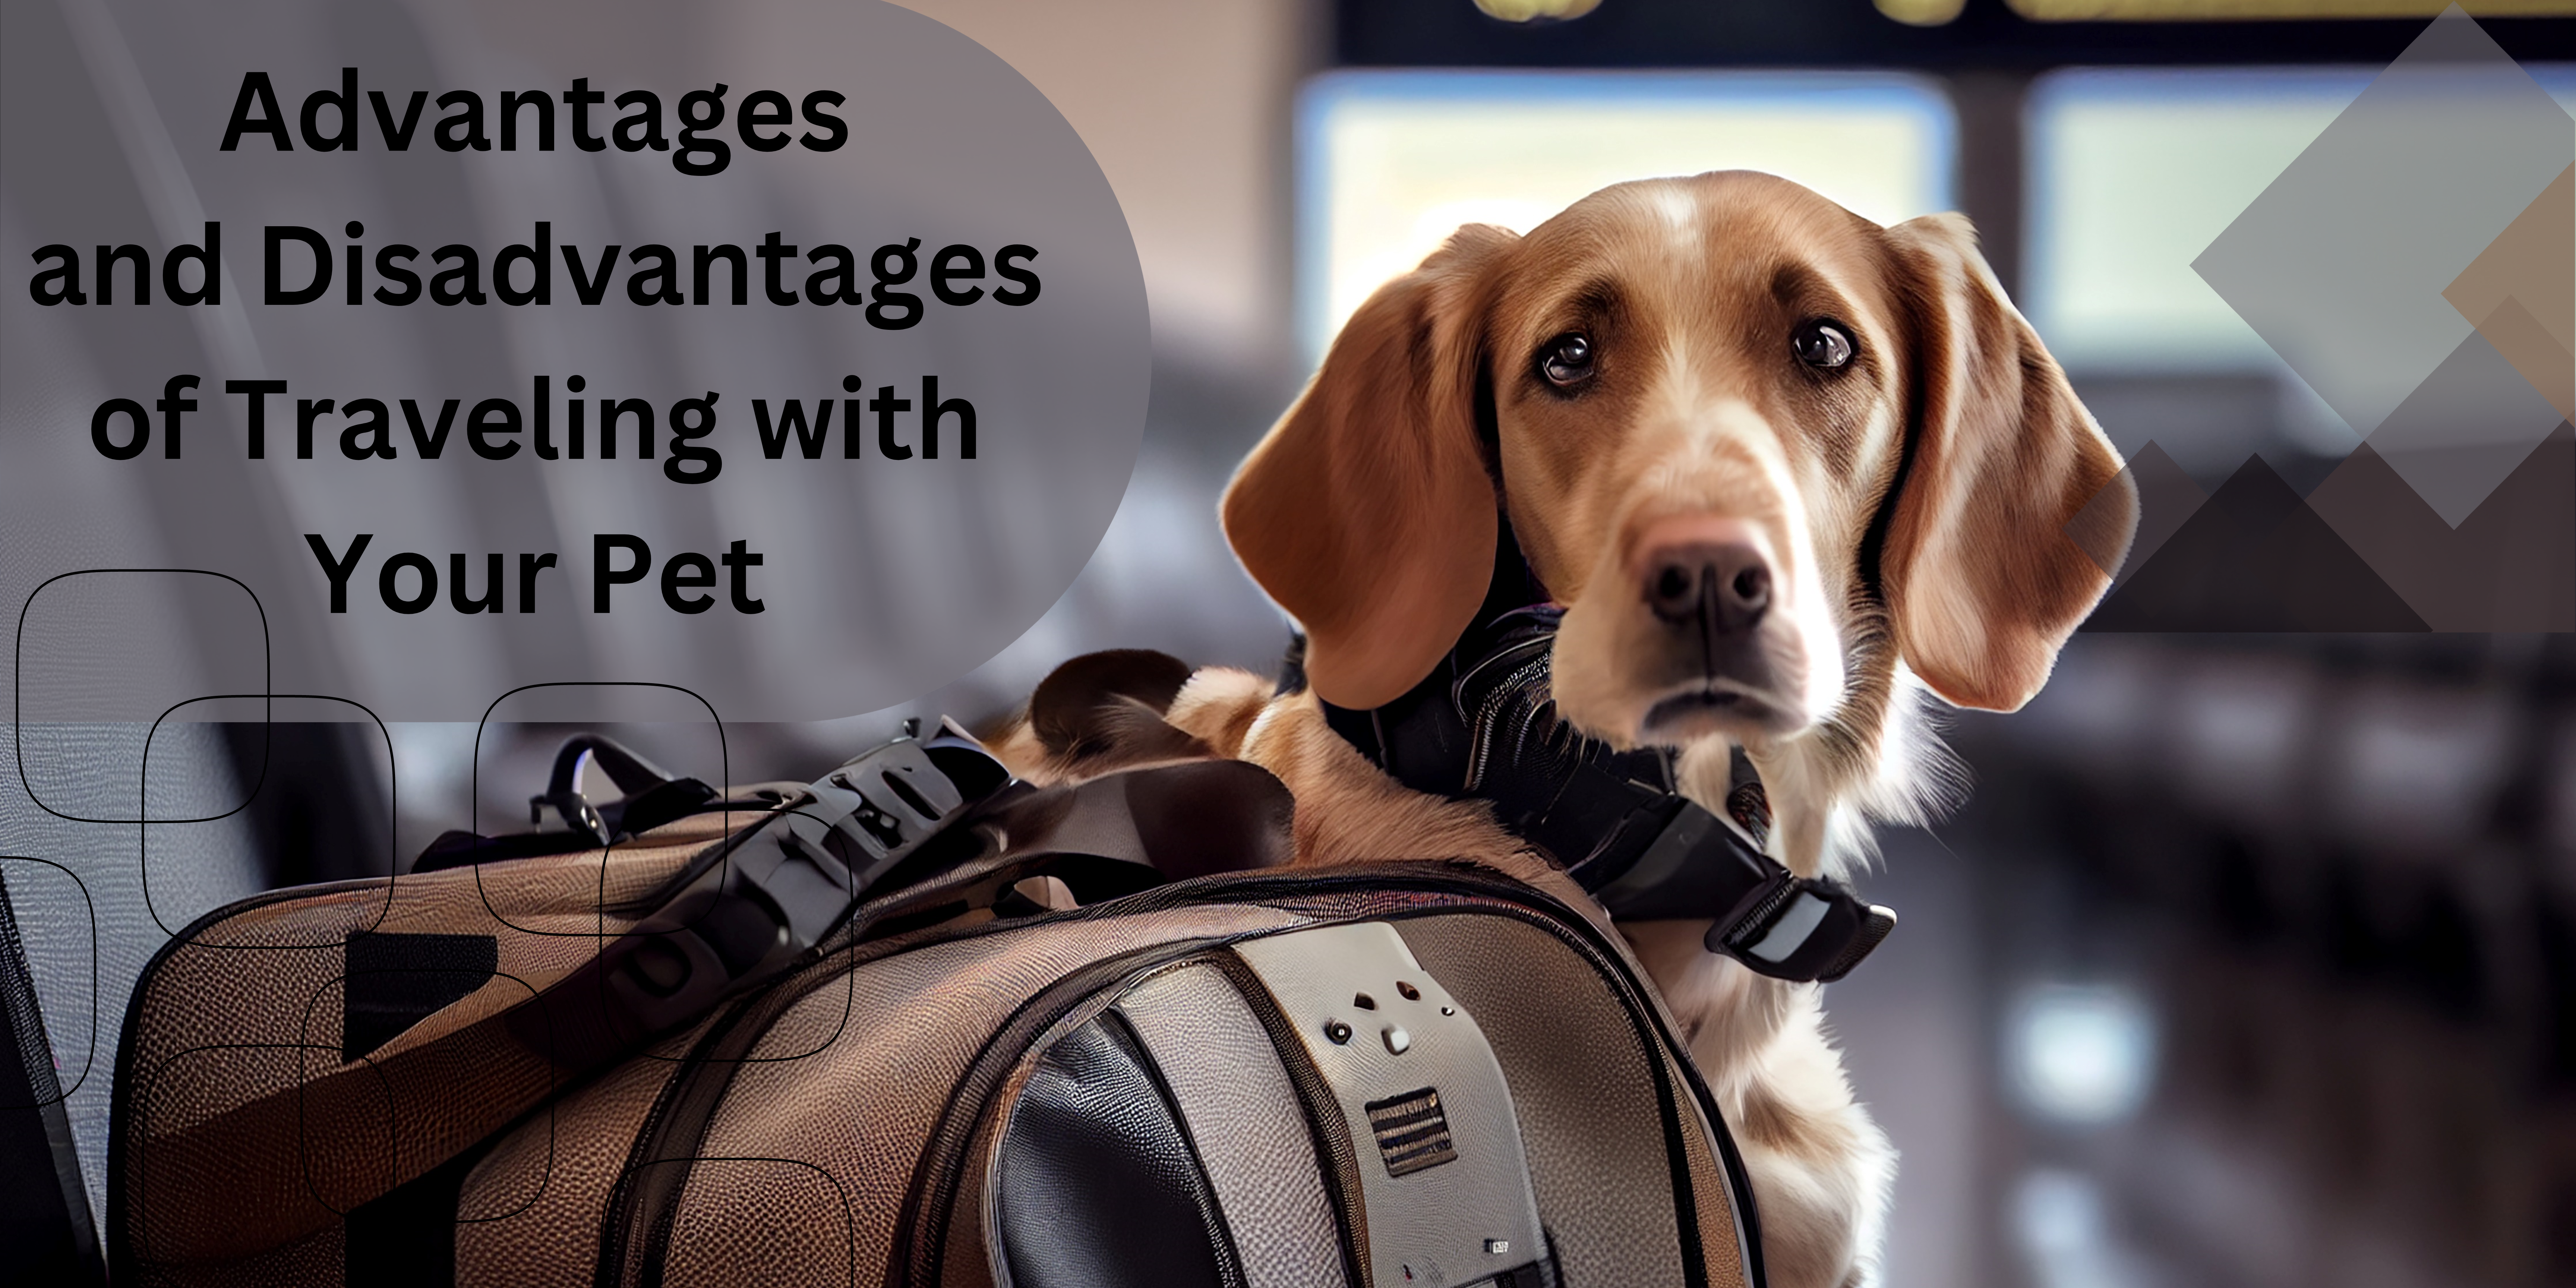 Advantages and disadvantages of traveling with your pet